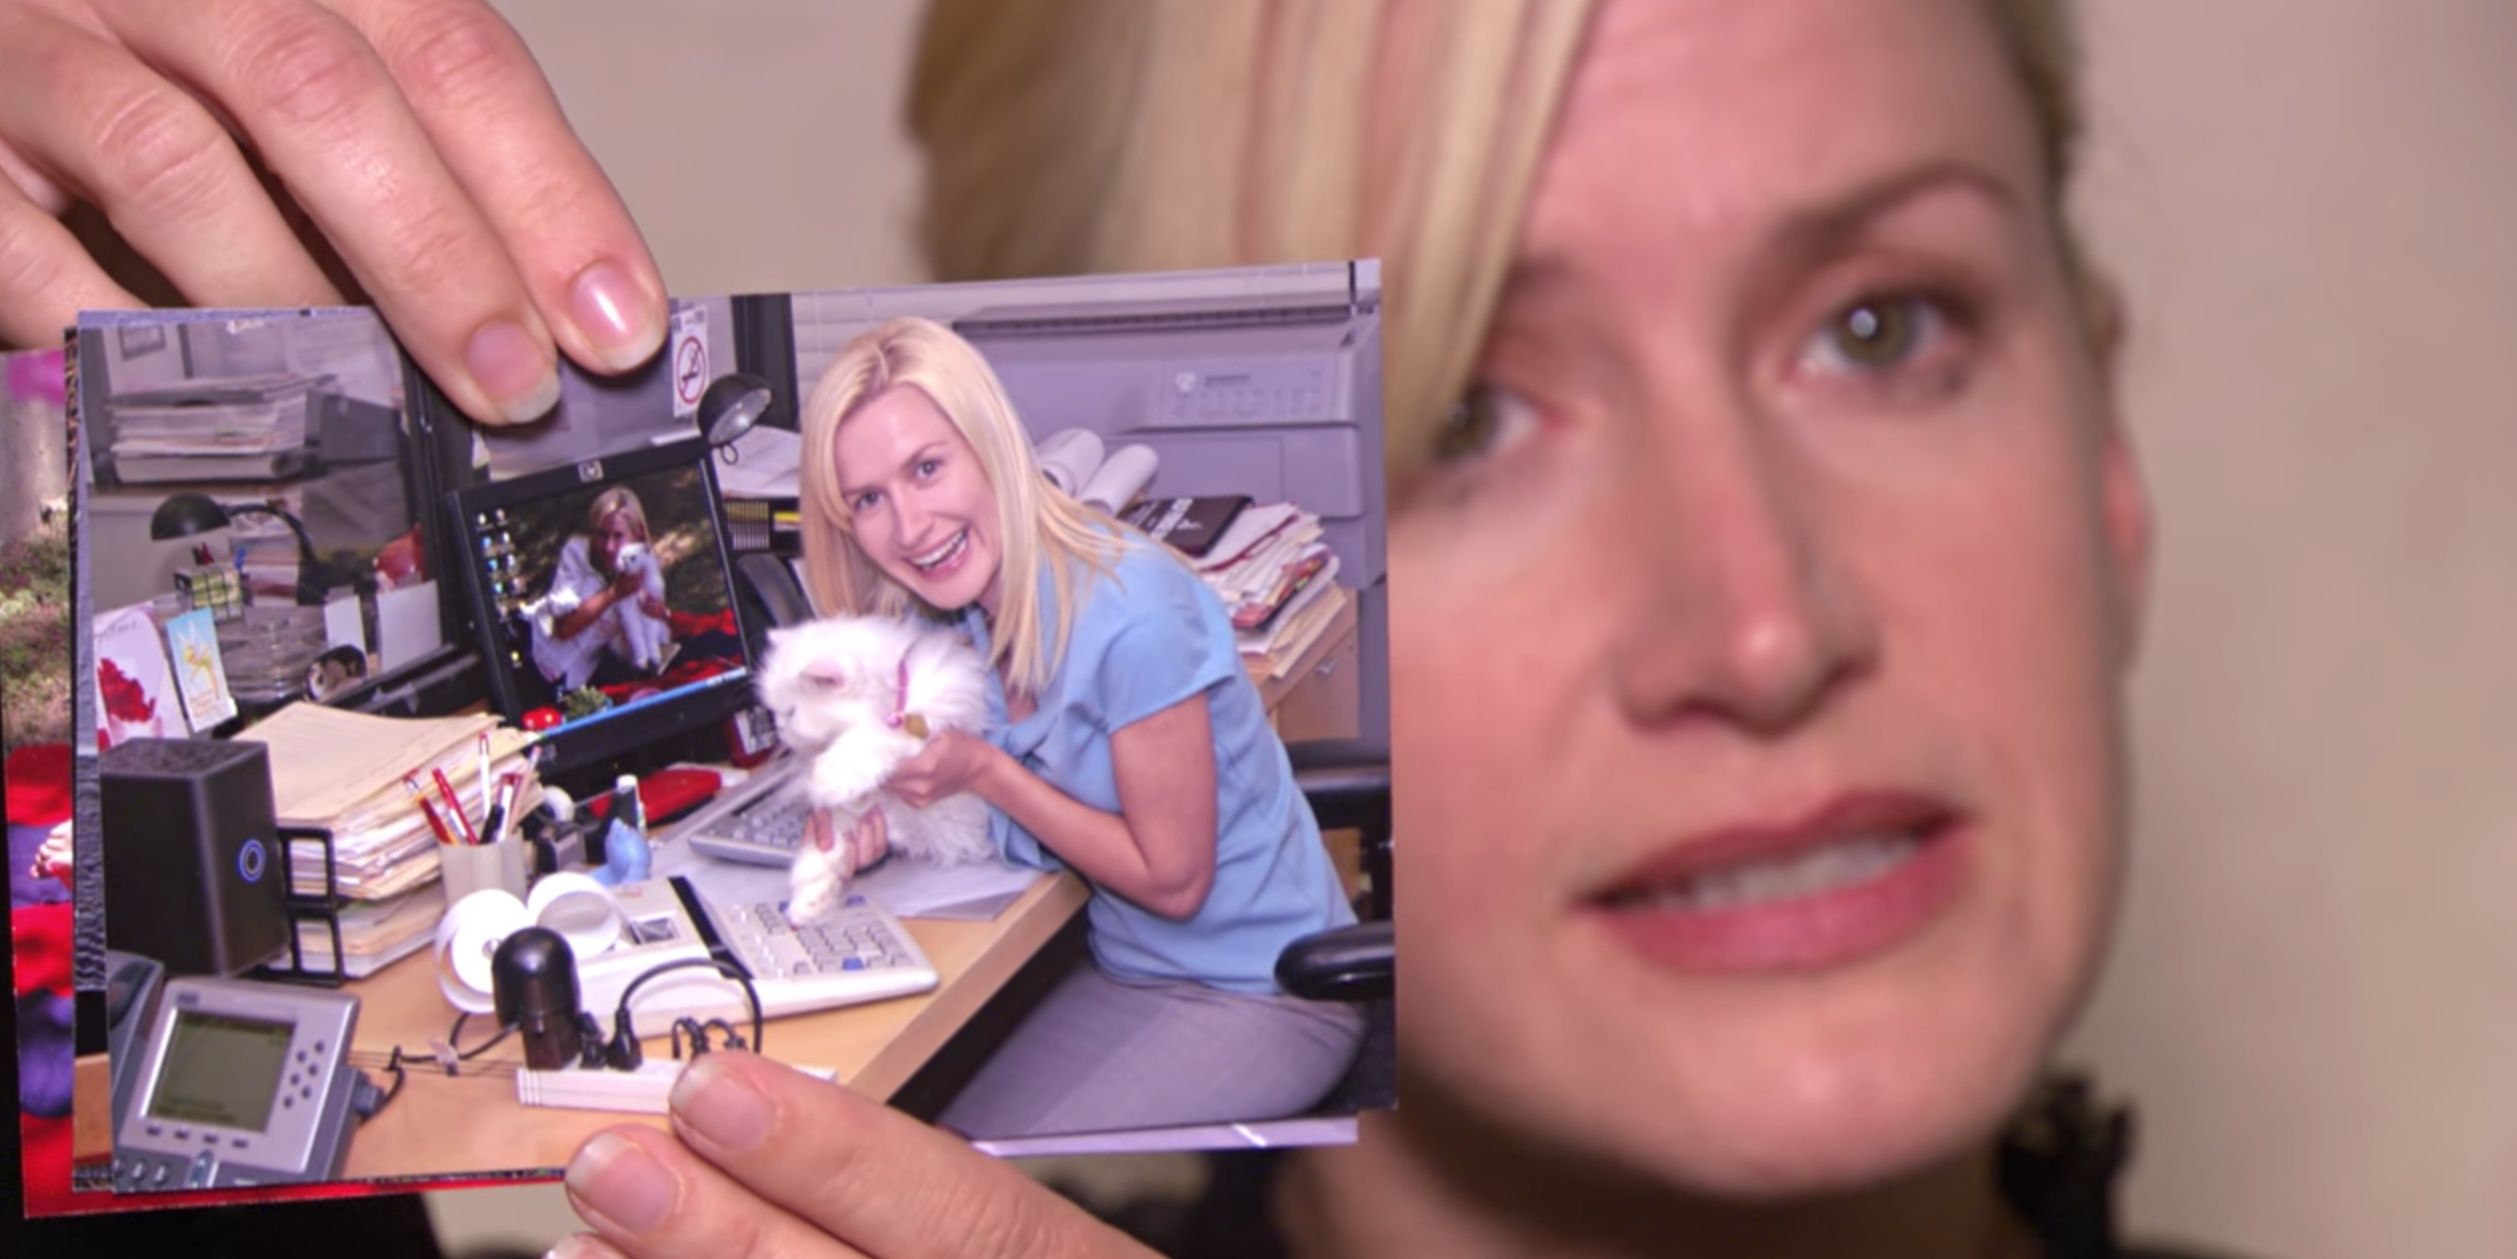 Angela holding up a picture of Sprinkles on The Office